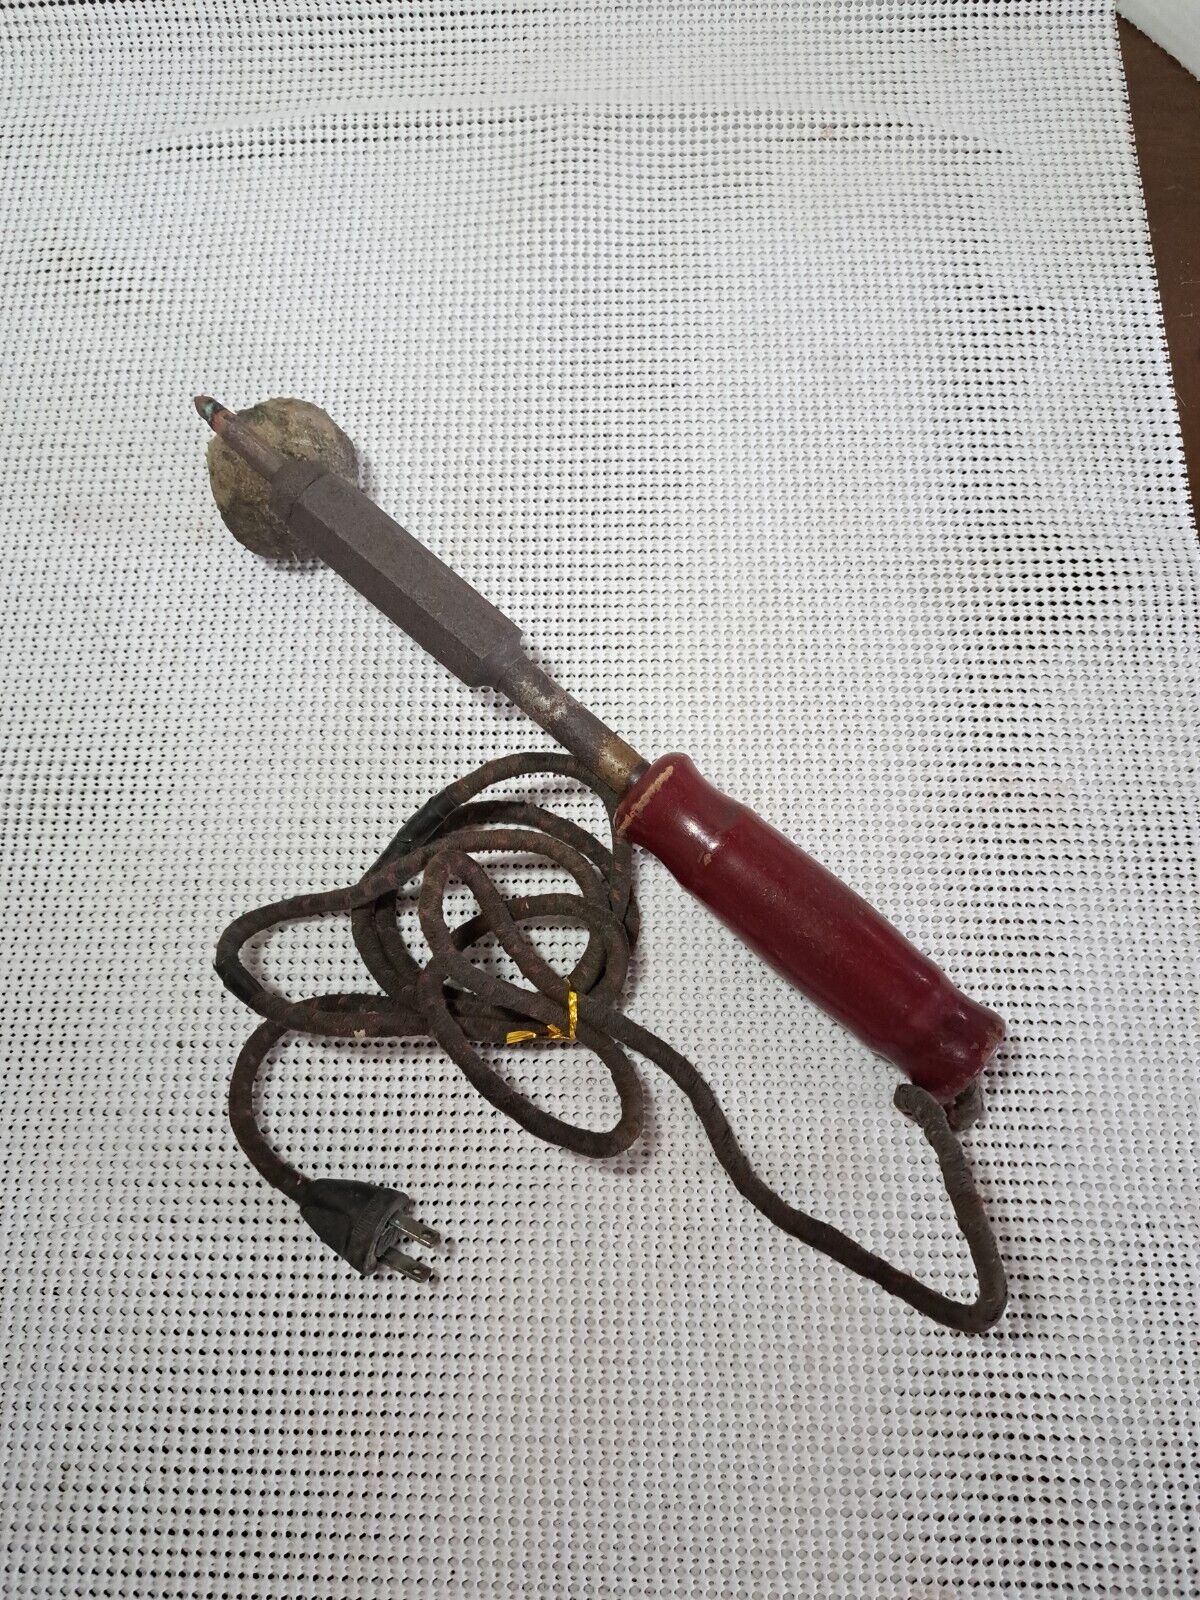 Vintage Hexacon  Soldering Iron With Cloth Cord, Working, Very Rusty